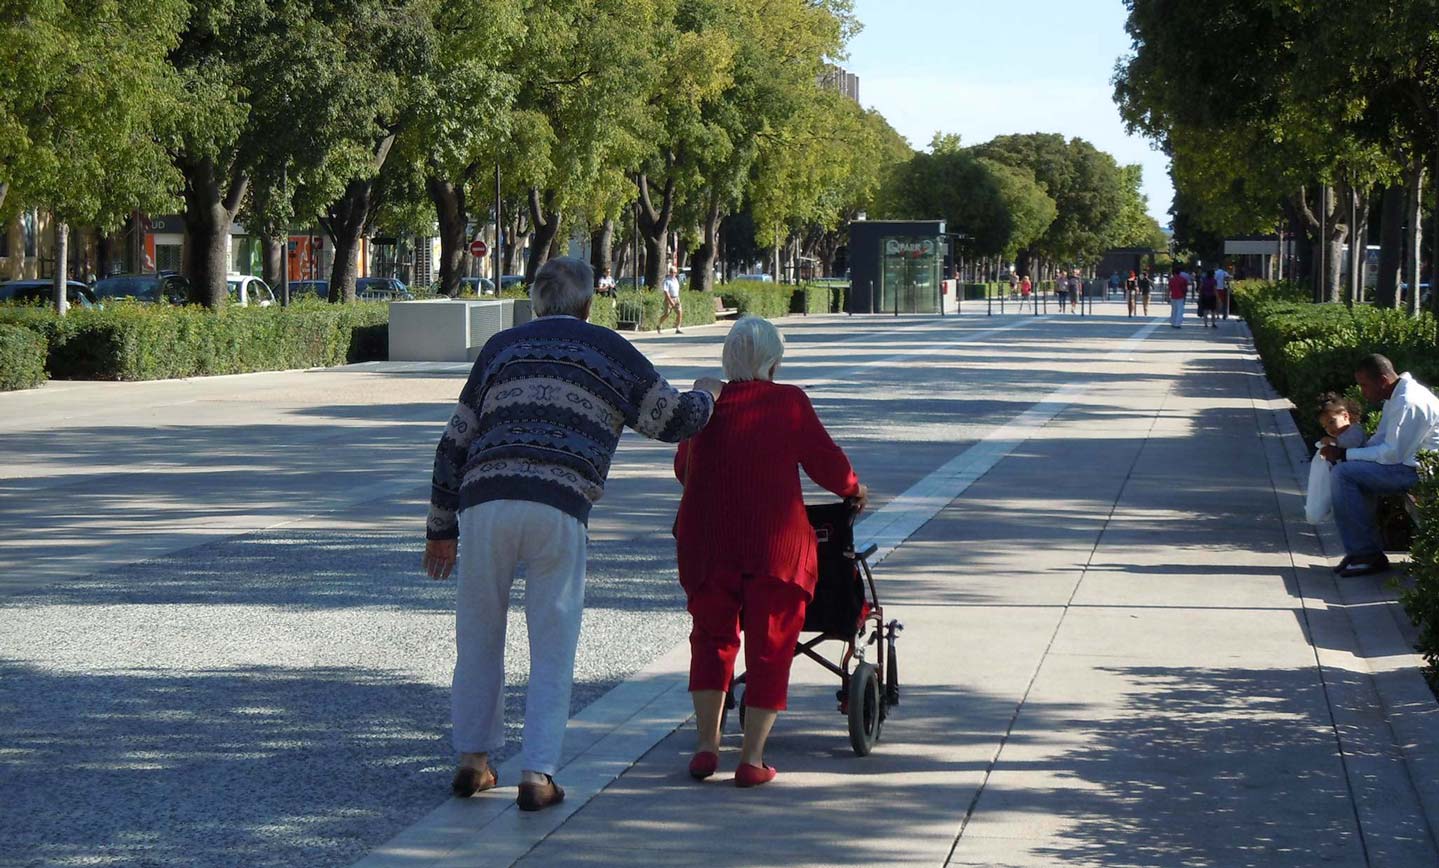 An elderly couple walking through a green urban space under the shading of tall trees.